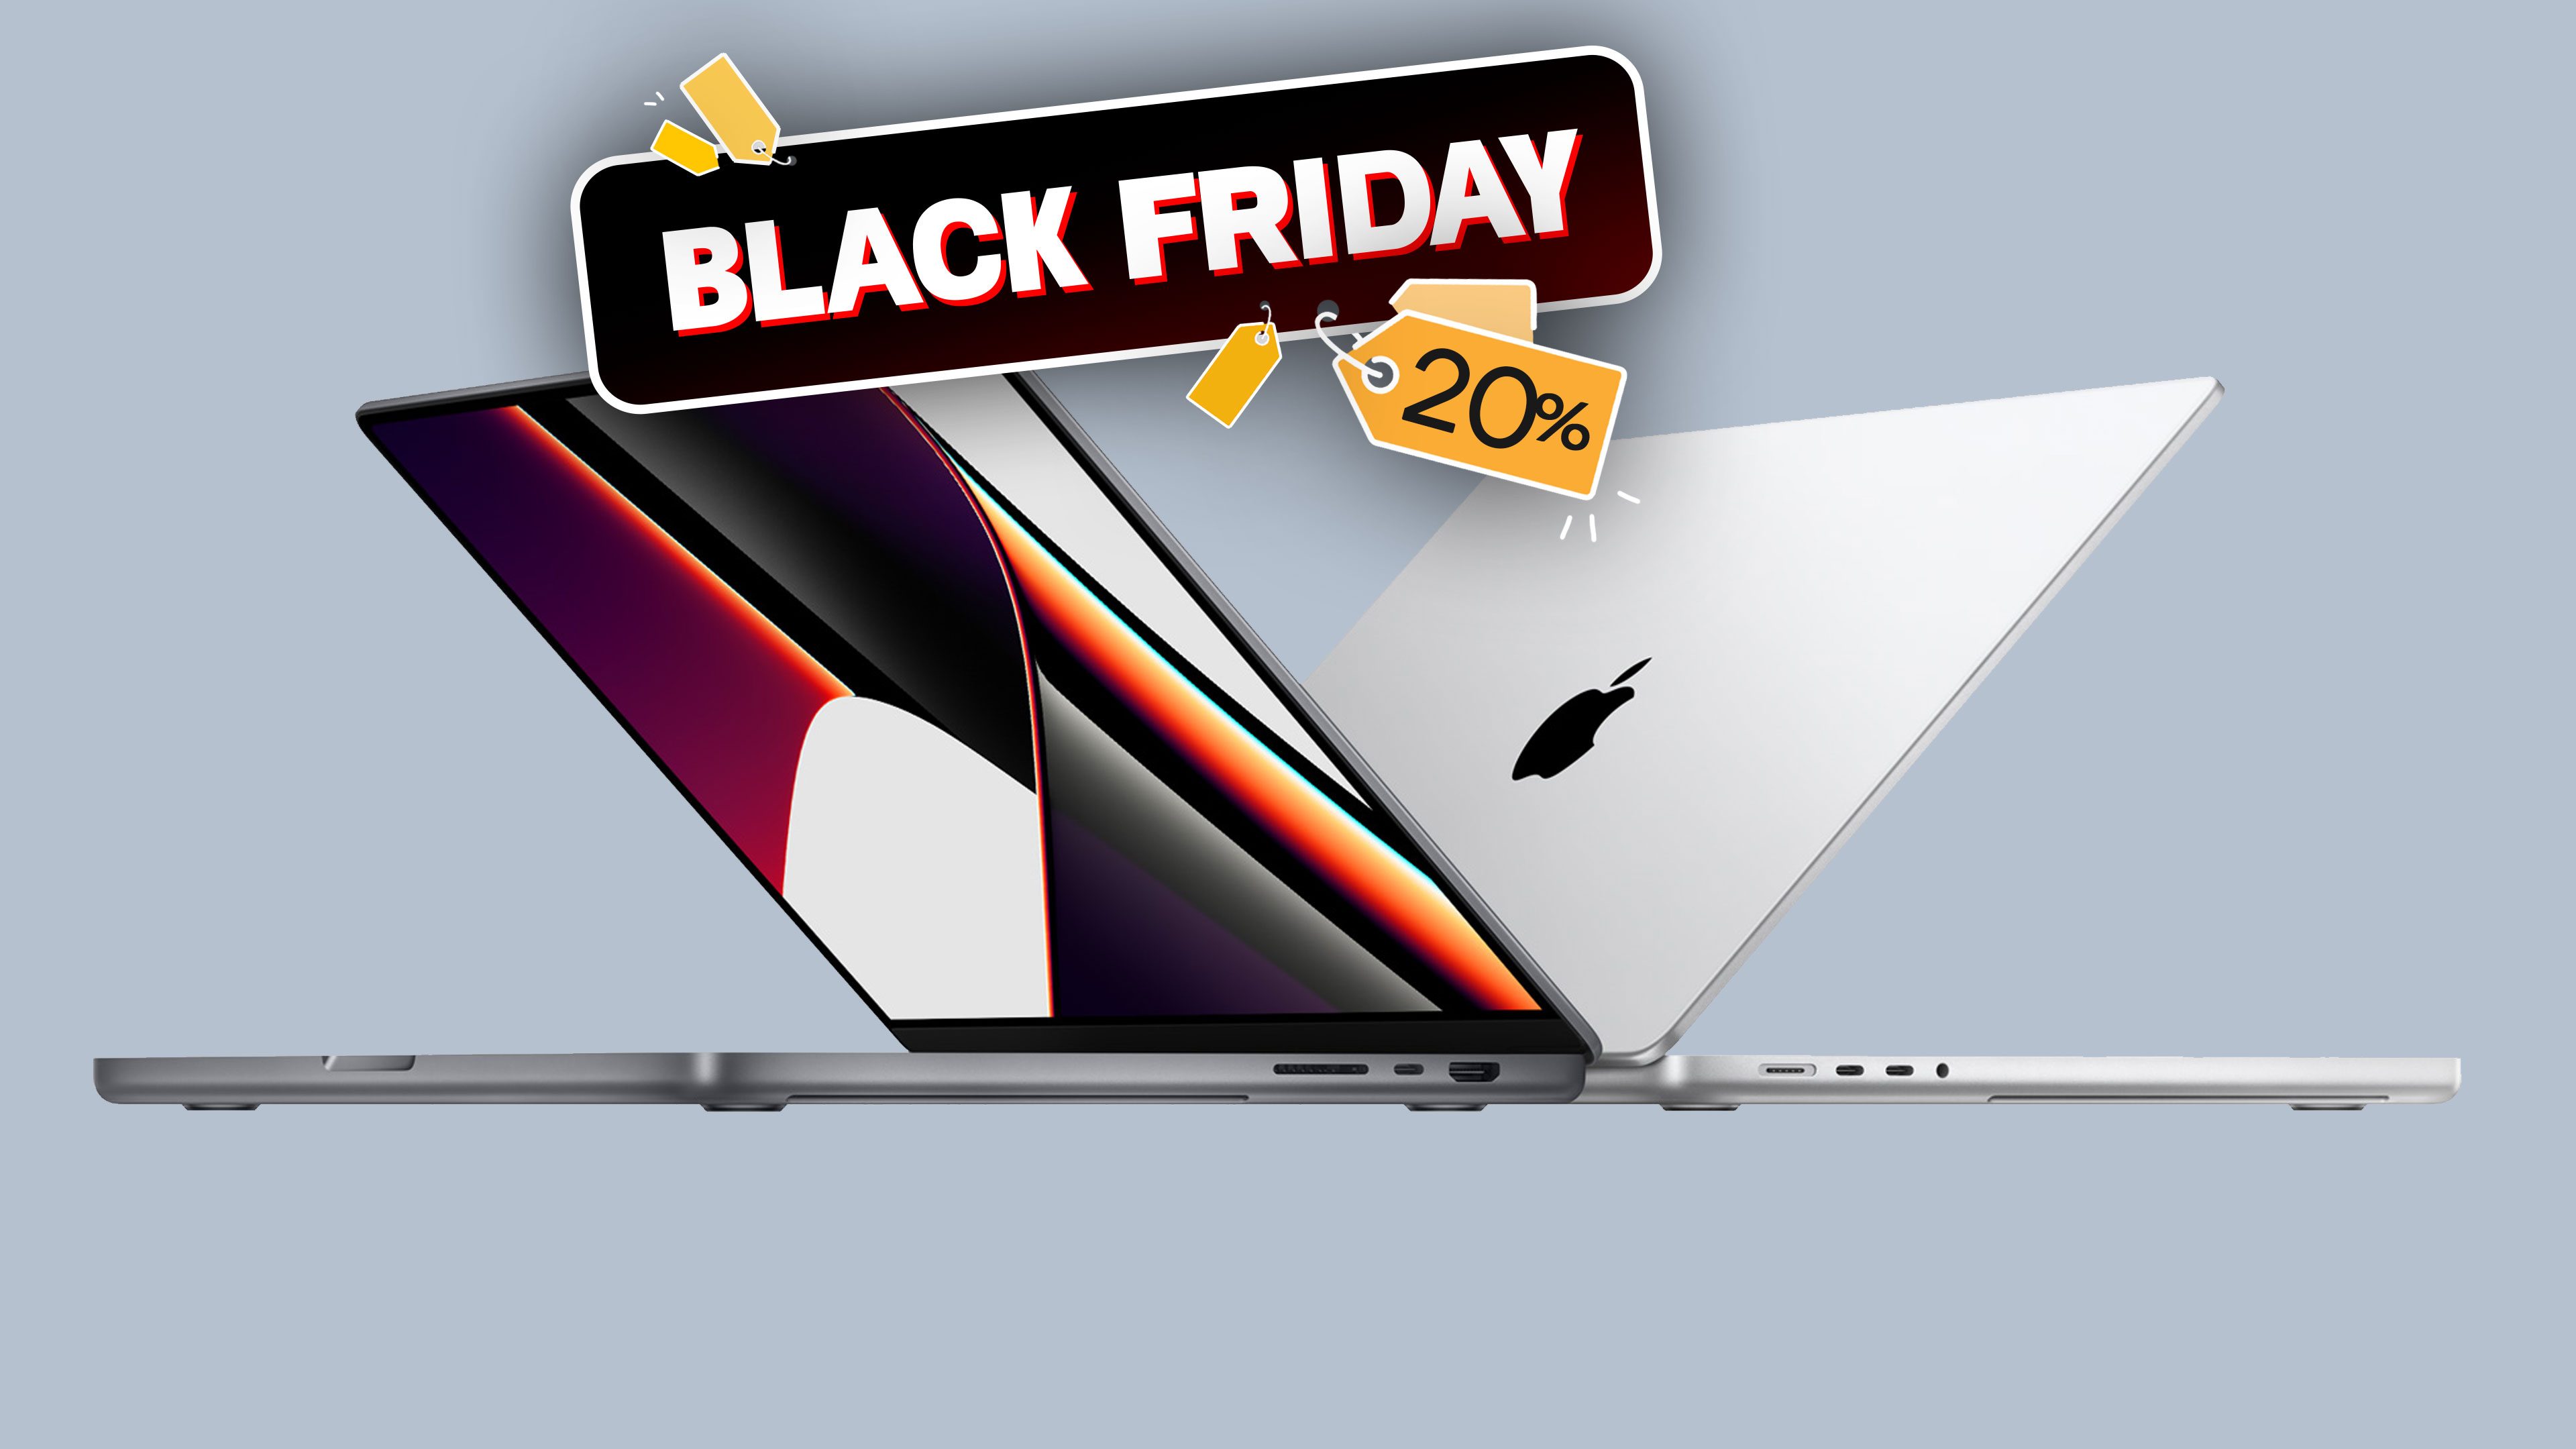 Buy the MacBook Pro M1 Pro with a rare 400 discount on Black Friday